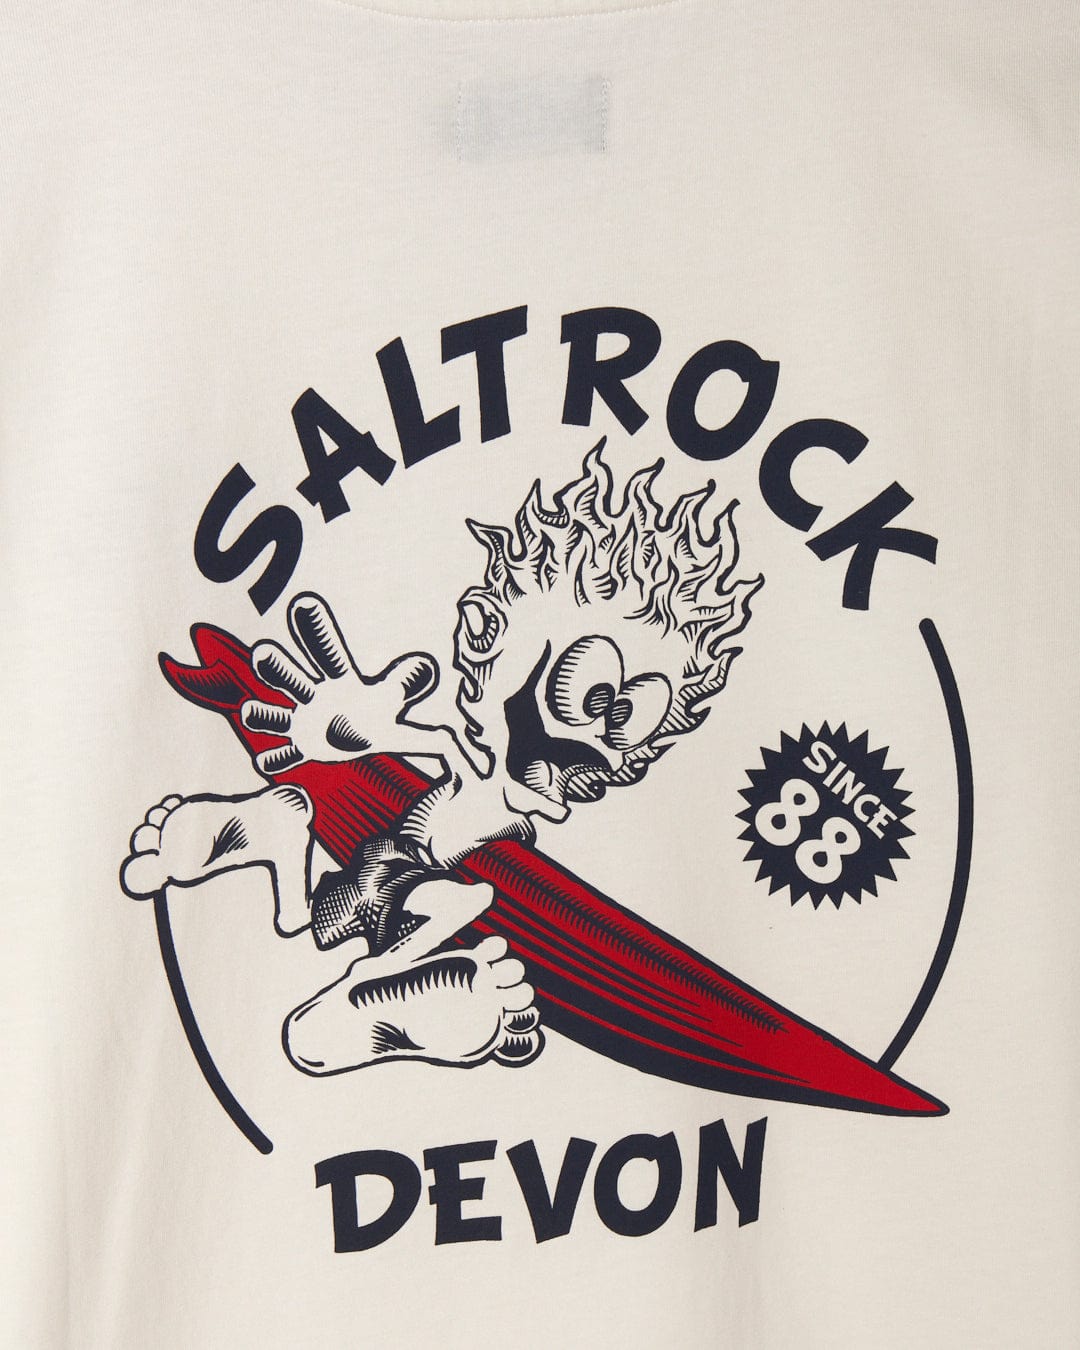 This Wave Rider Devon - Mens Short Sleeve T-Shirt - White features a "Ride The Waves" print, making it the perfect surf-inspired tee. Complete with the words "Salt Rock Devon", this shirt is a must.